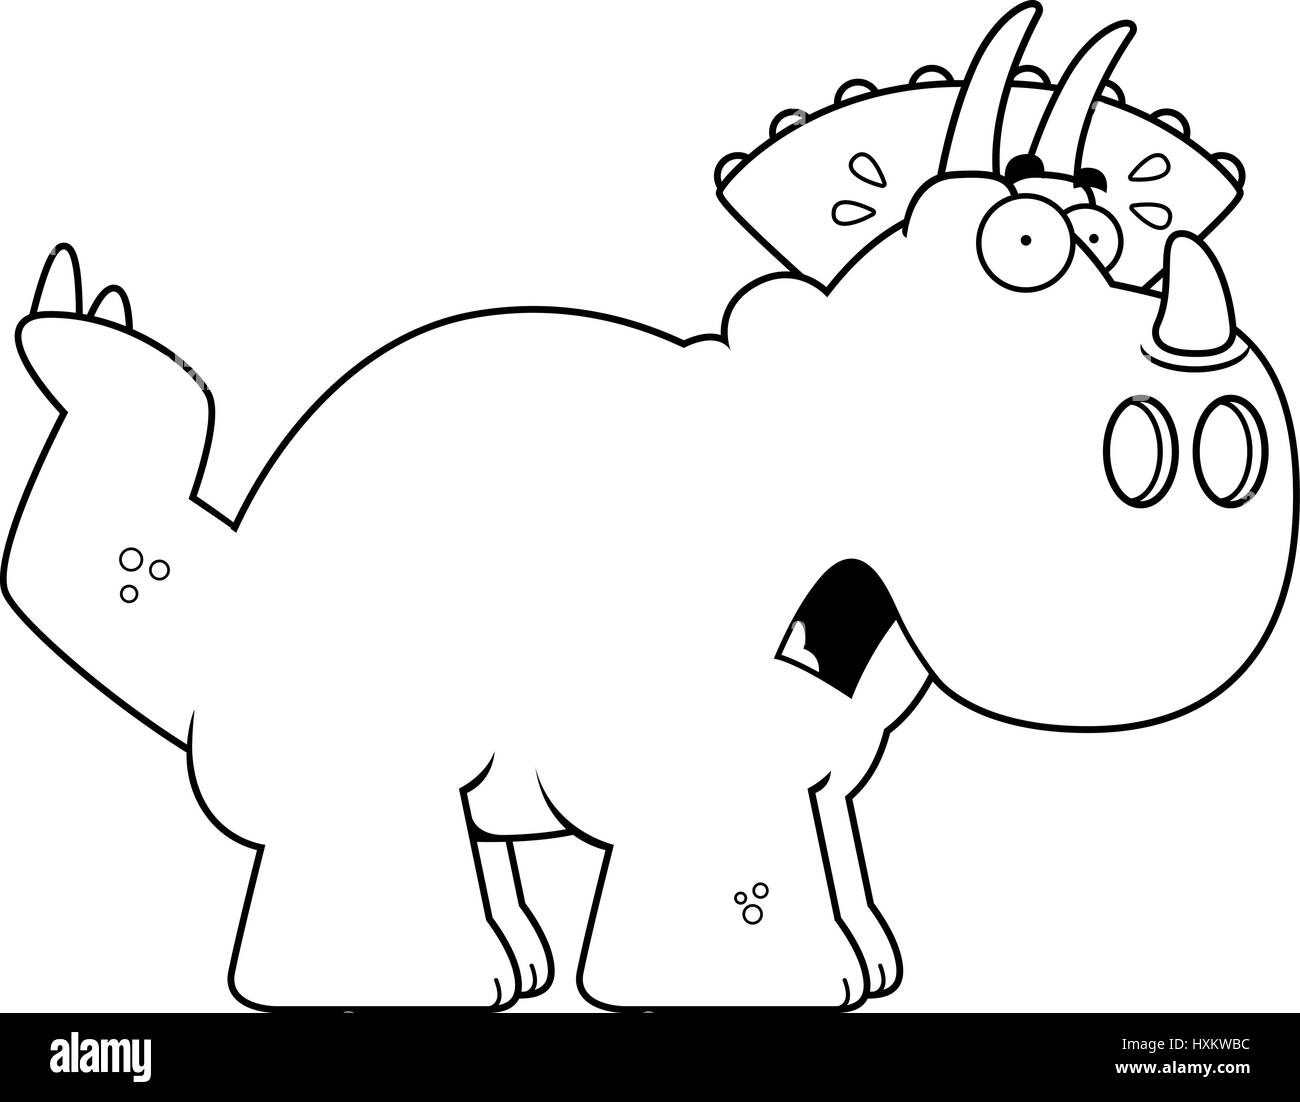 A cartoon illustration of a Triceratops dinosaur looking scared. Stock Vector